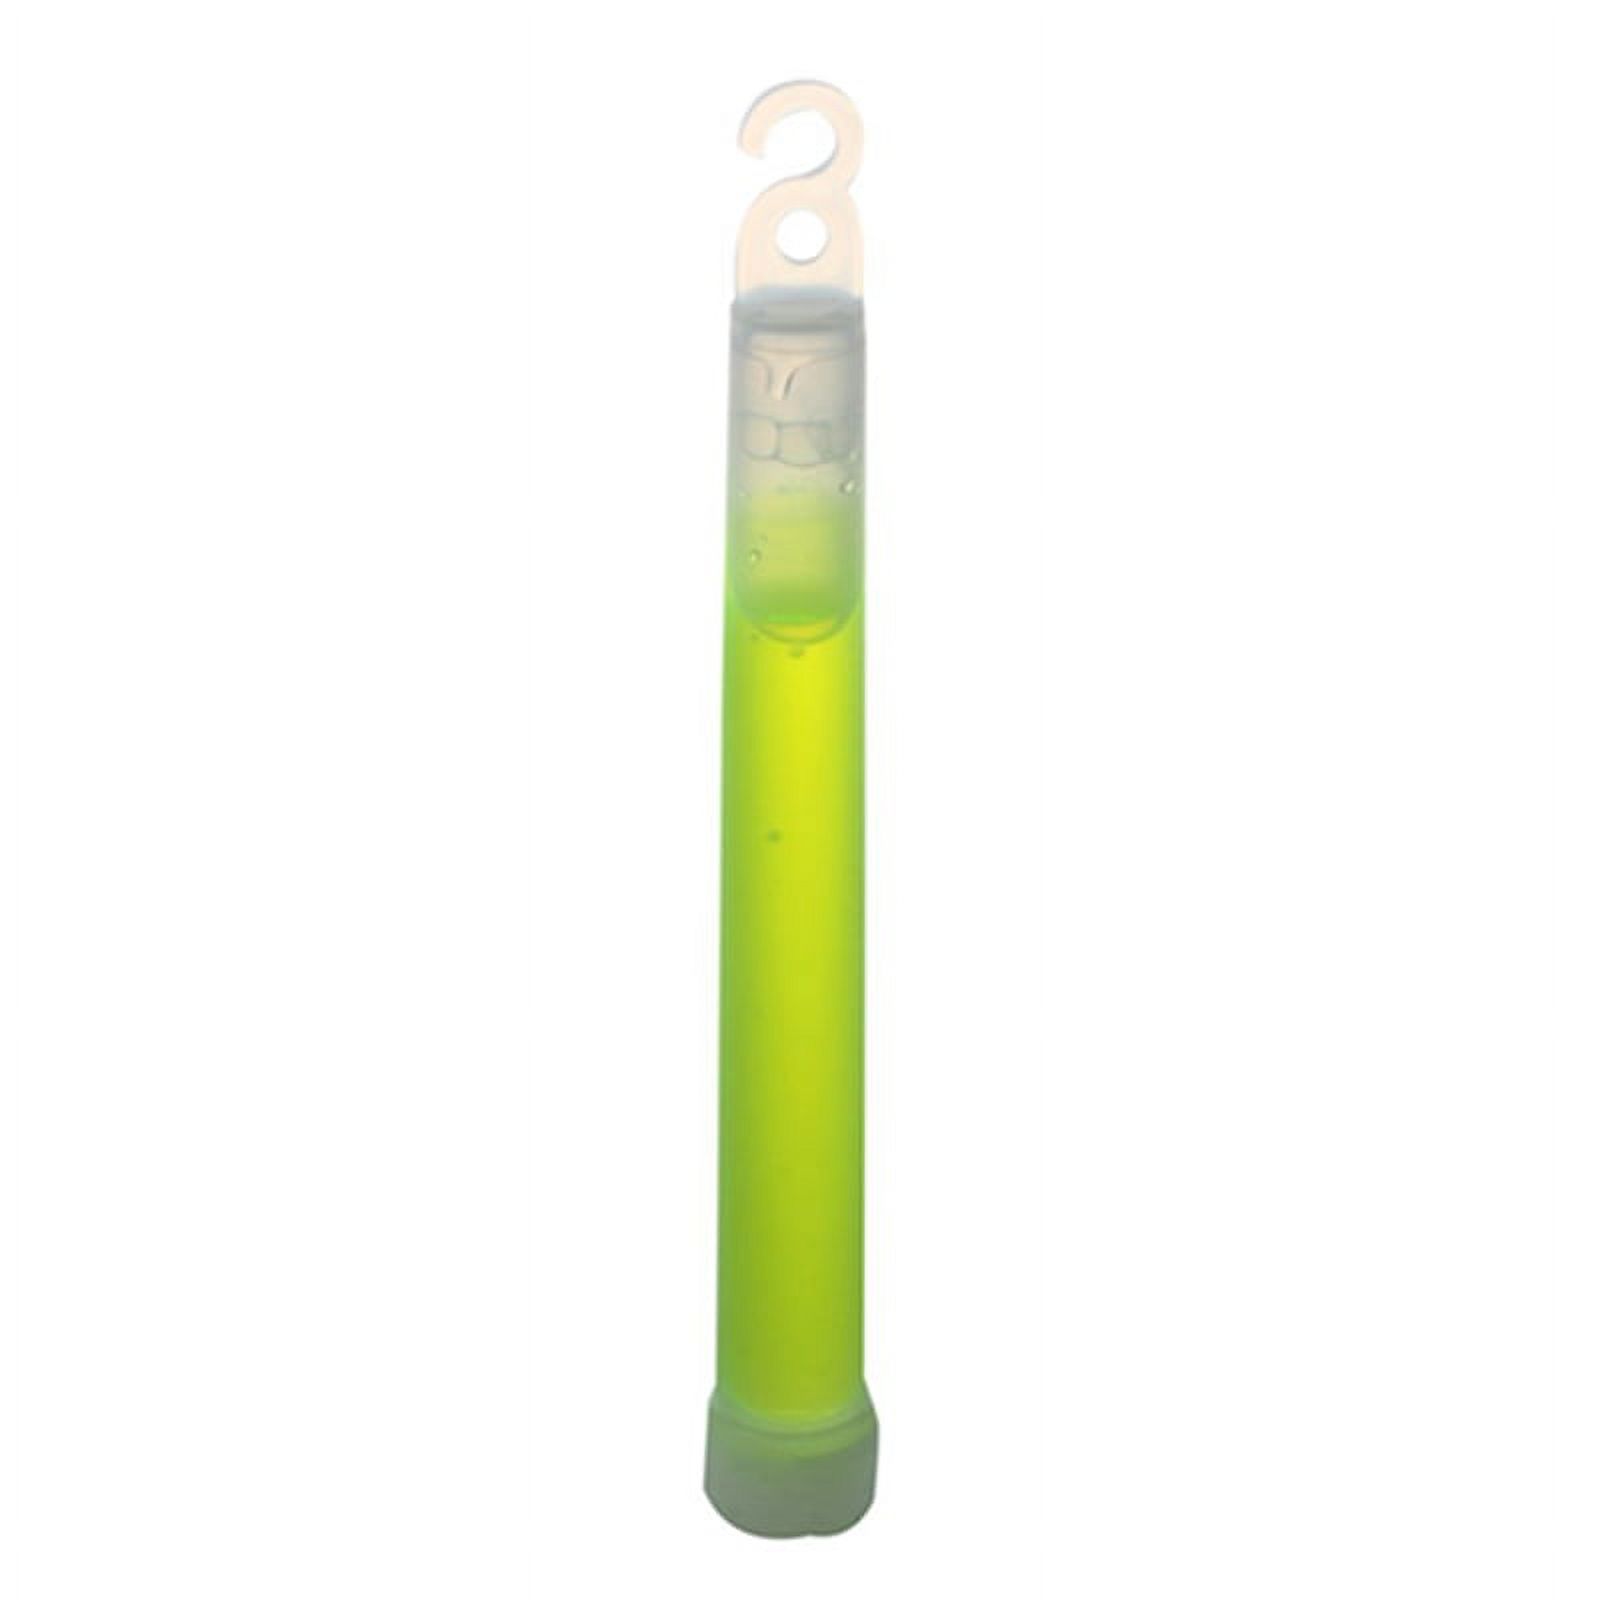 Glow Sticks Party Camping Emergency Surival Lights GlowStick Green - image 1 of 7